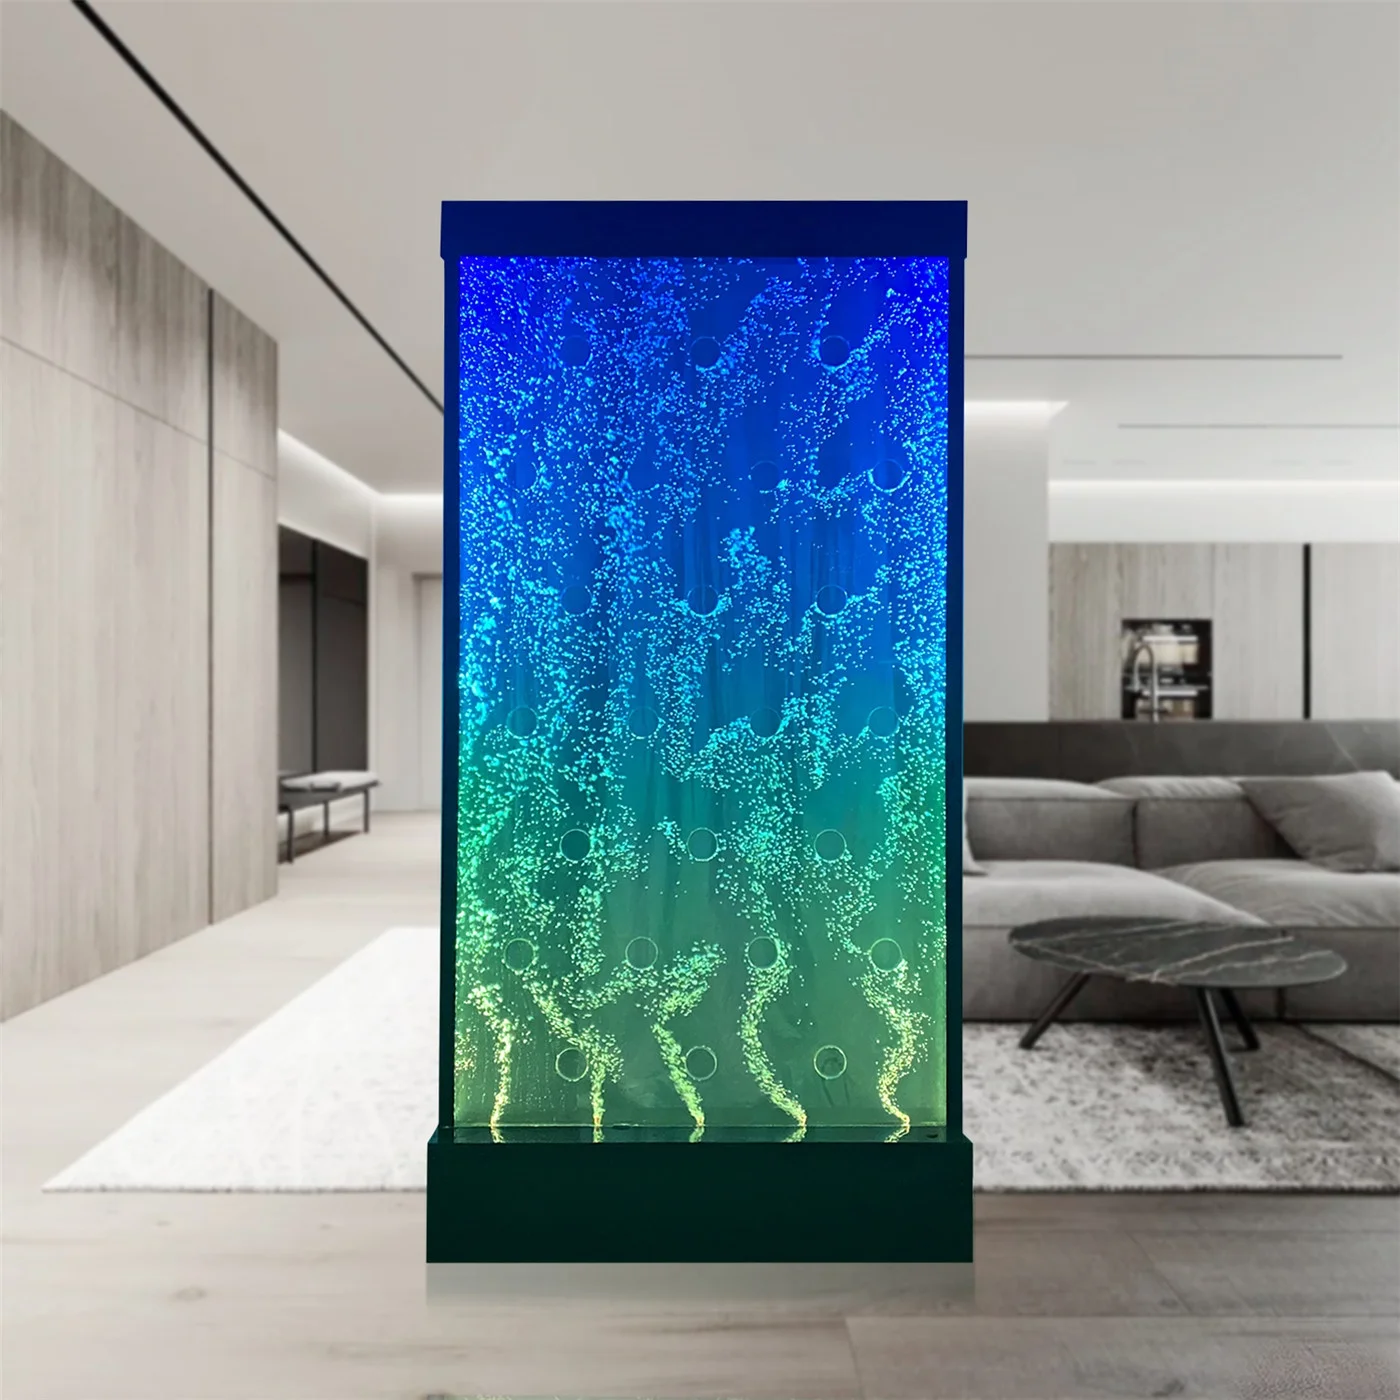 
Custom made floor standing led water bubble wall with company logos 